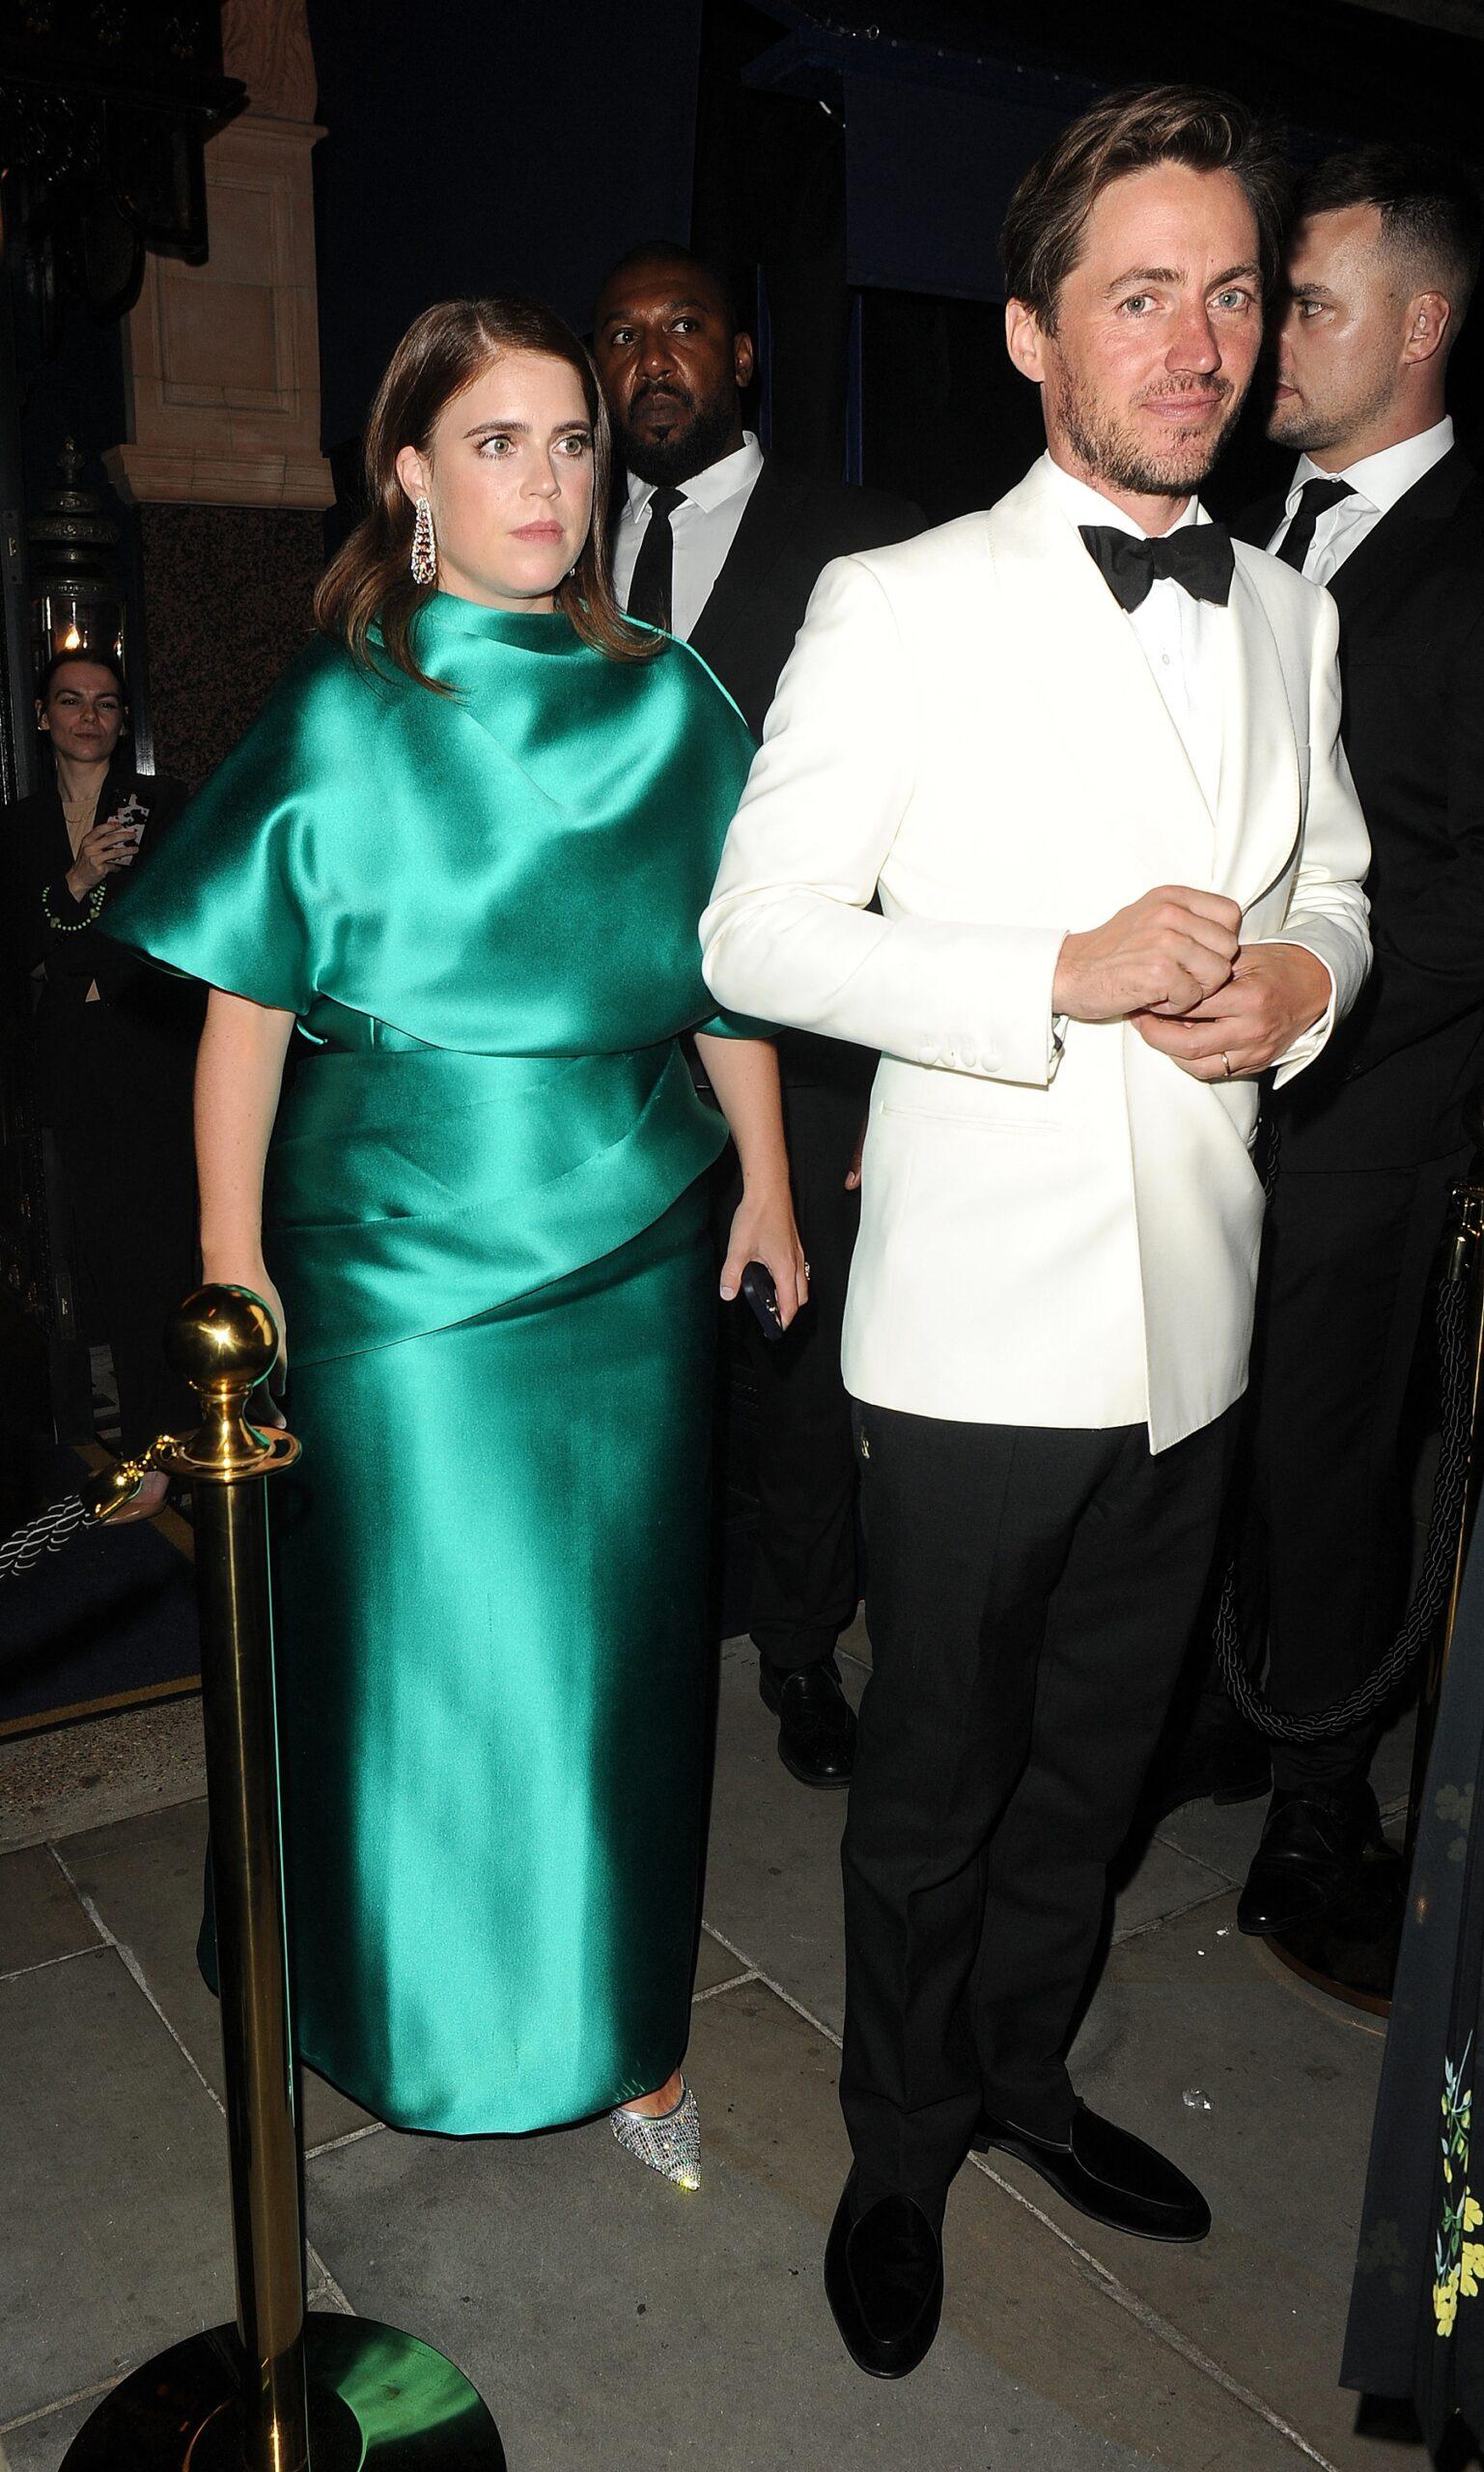 Princess Eugenie and Edoardo Mapelli Mozzi are seen leaving George Restaurant in Mayfair, having attended the Vogue World afterparty